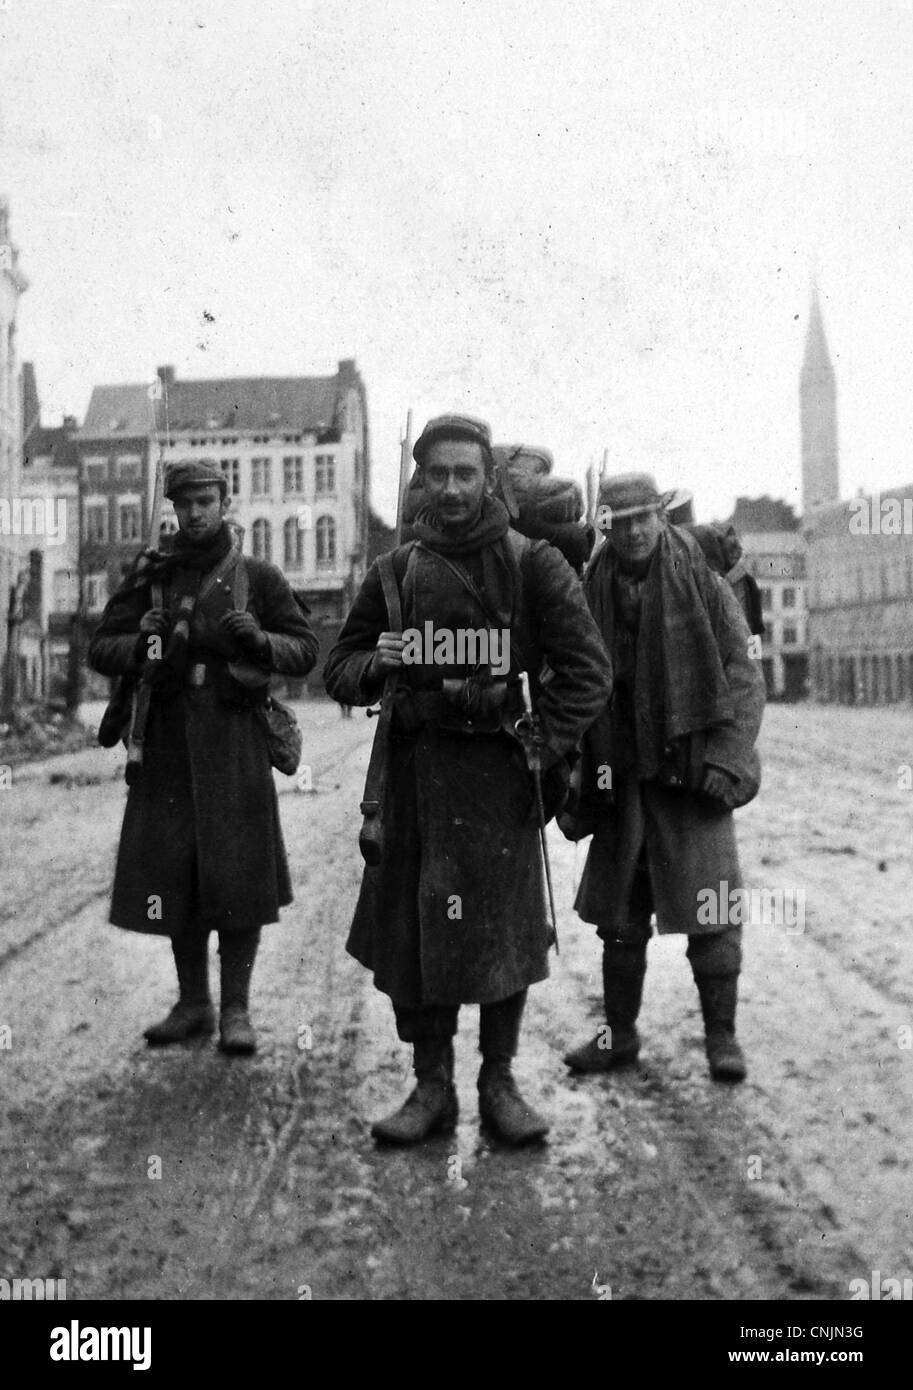 French Soldiers in the city of Ypres, Belgium, during 1914. Stock Photo